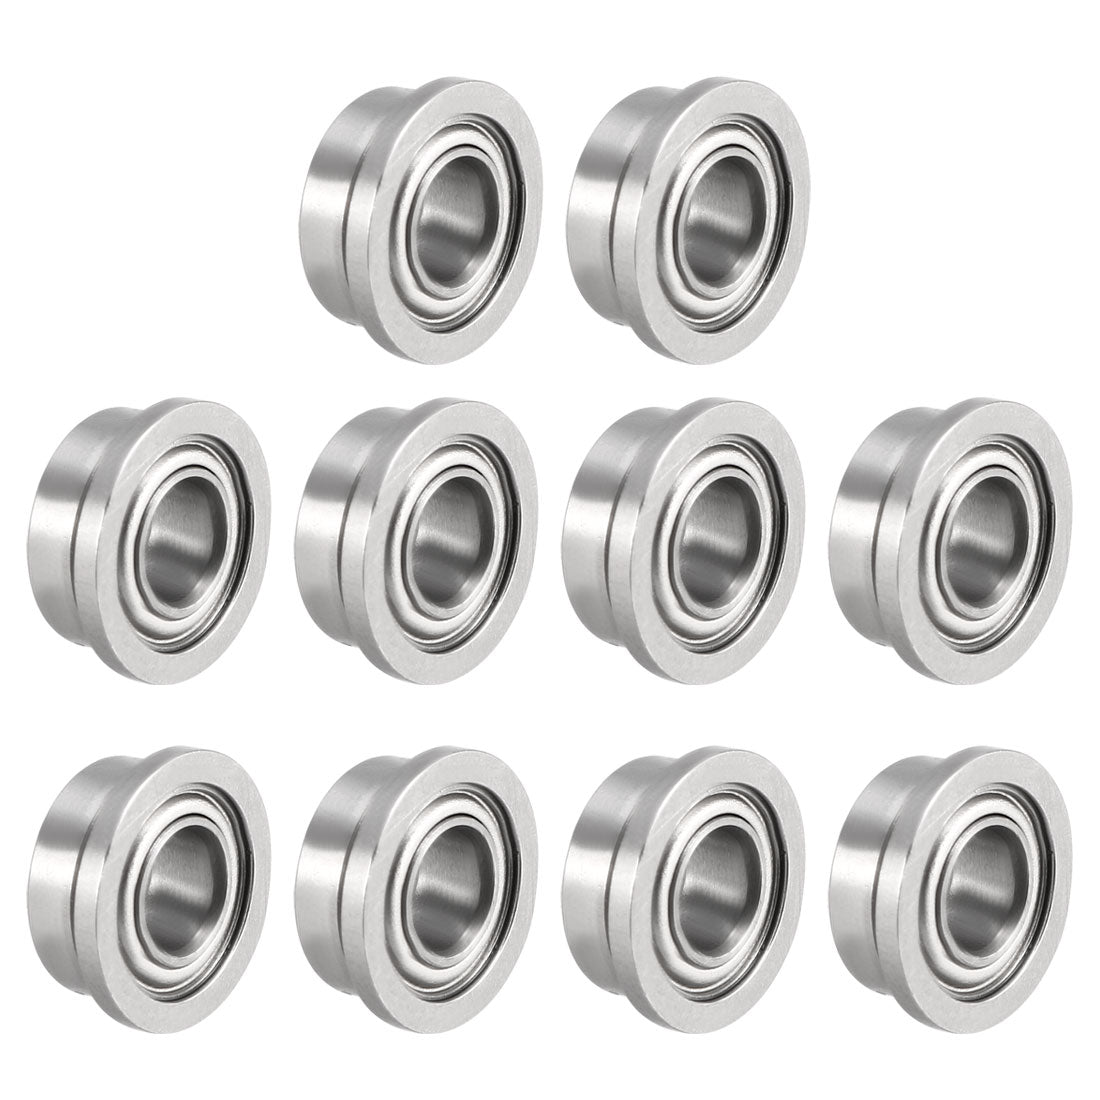 uxcell Uxcell FR144ZZ Flange Ball 1/8"x1/4"x7/64" Double Metal Double Shielded Bearings 10 Pcs